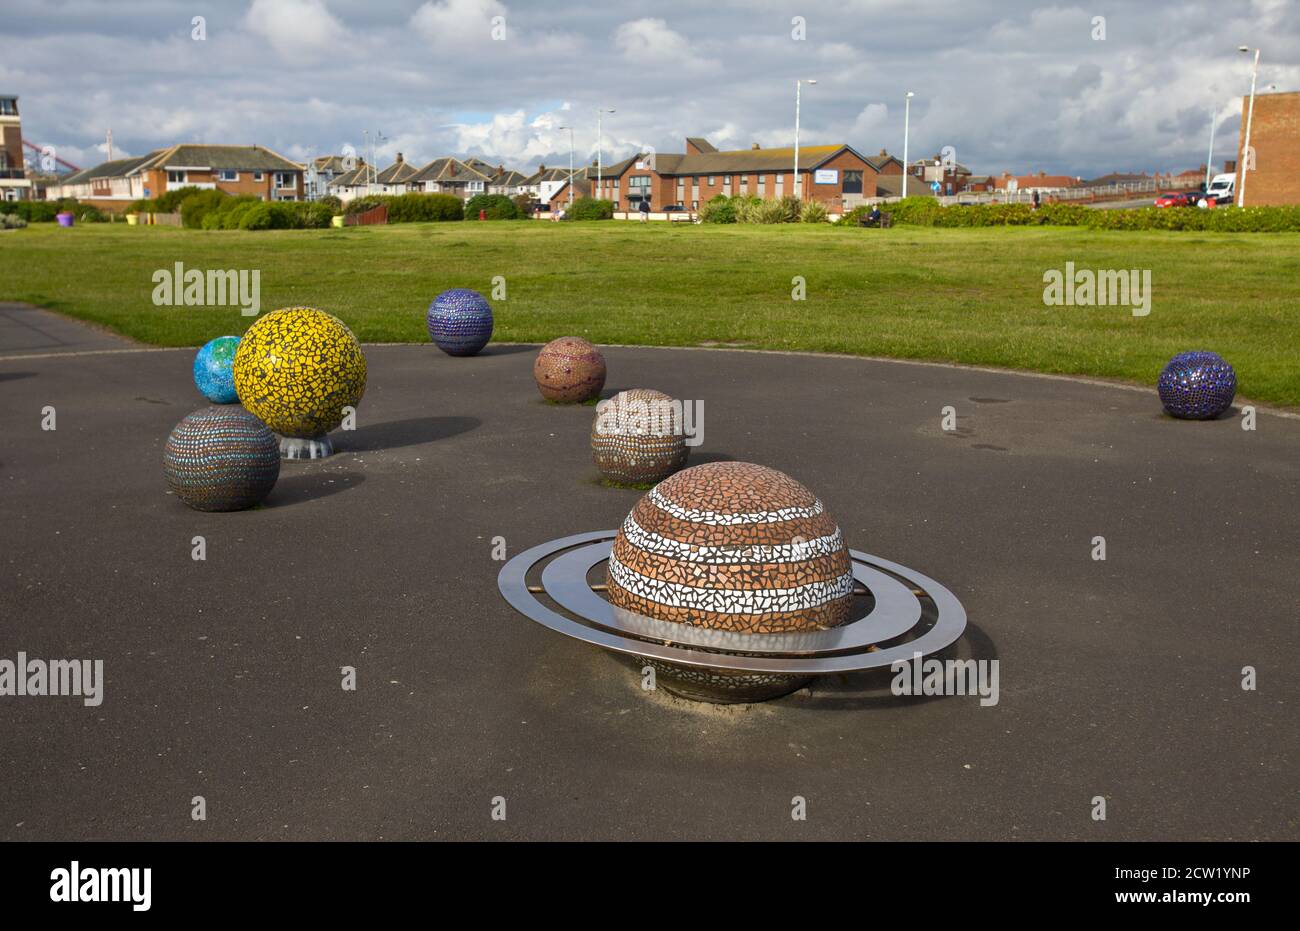 Sculptures of the planets in the solar system in a park. Astronomy, education, science for kids, 3d representation, fun learning, mosaics, Saturn Stock Photo